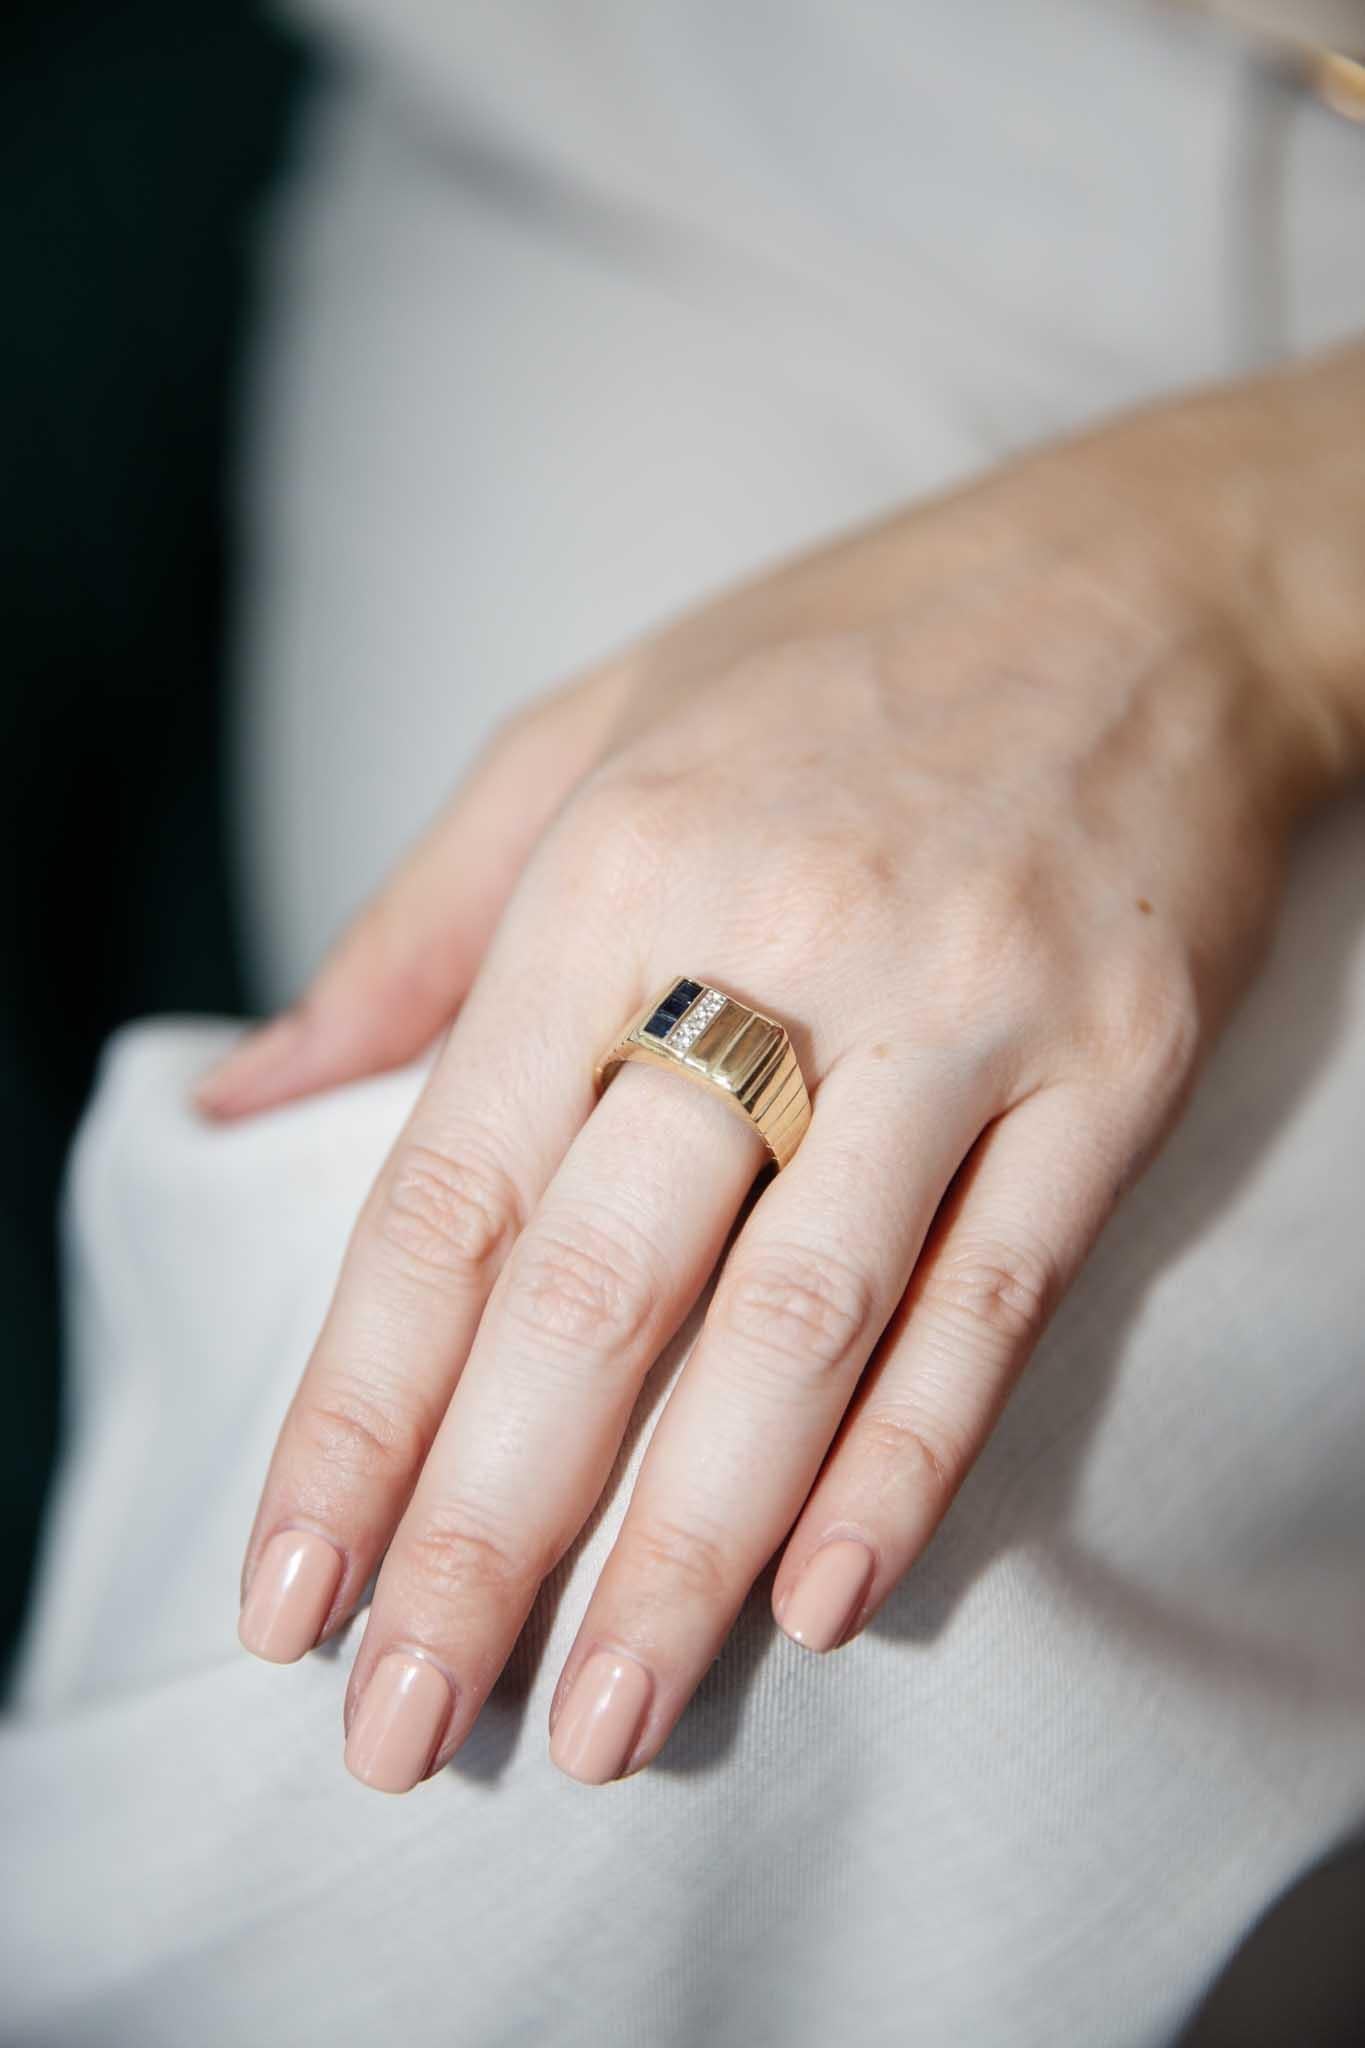 Crafted in 9 carat gold, our Quintus Ring is all hard lines and soft edges, the bright blue sapphires and diamonds adding a handsome finish.  Be it a gift for someone you love or for yourself, it is a classic that will last generations.

The Quintus